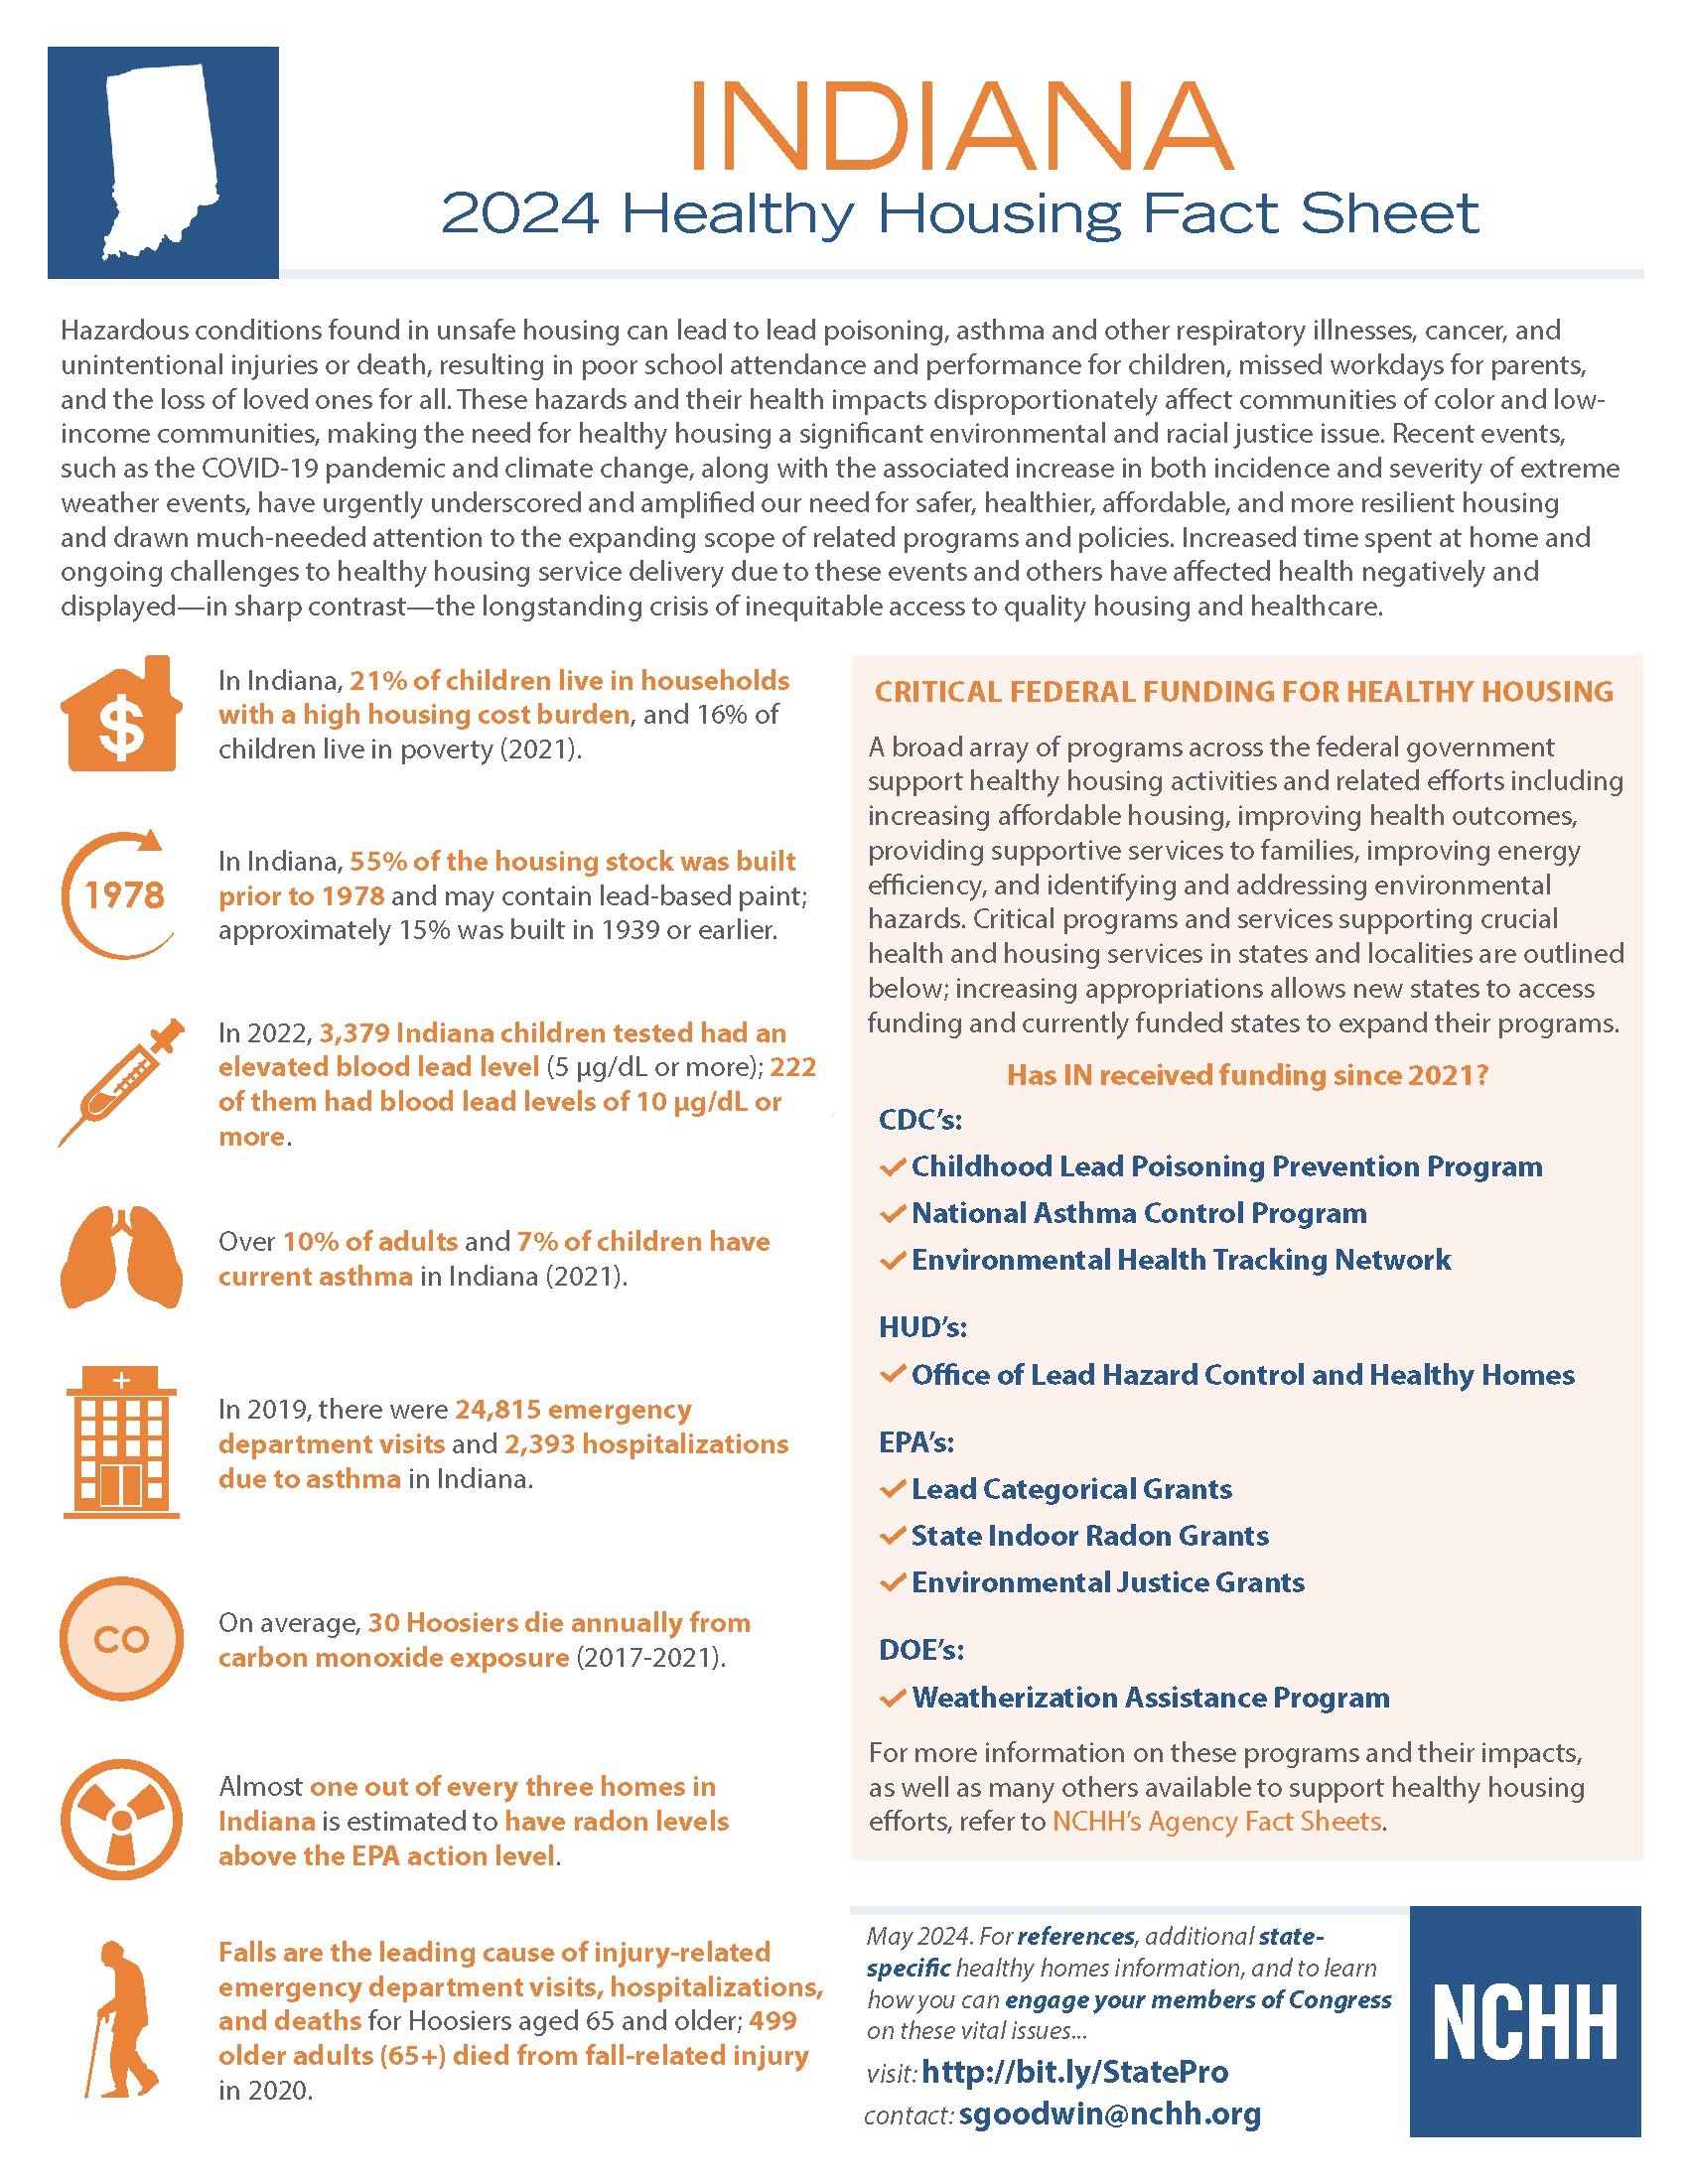 Fact sheet describing the overall environmental health of the state of Indiana.